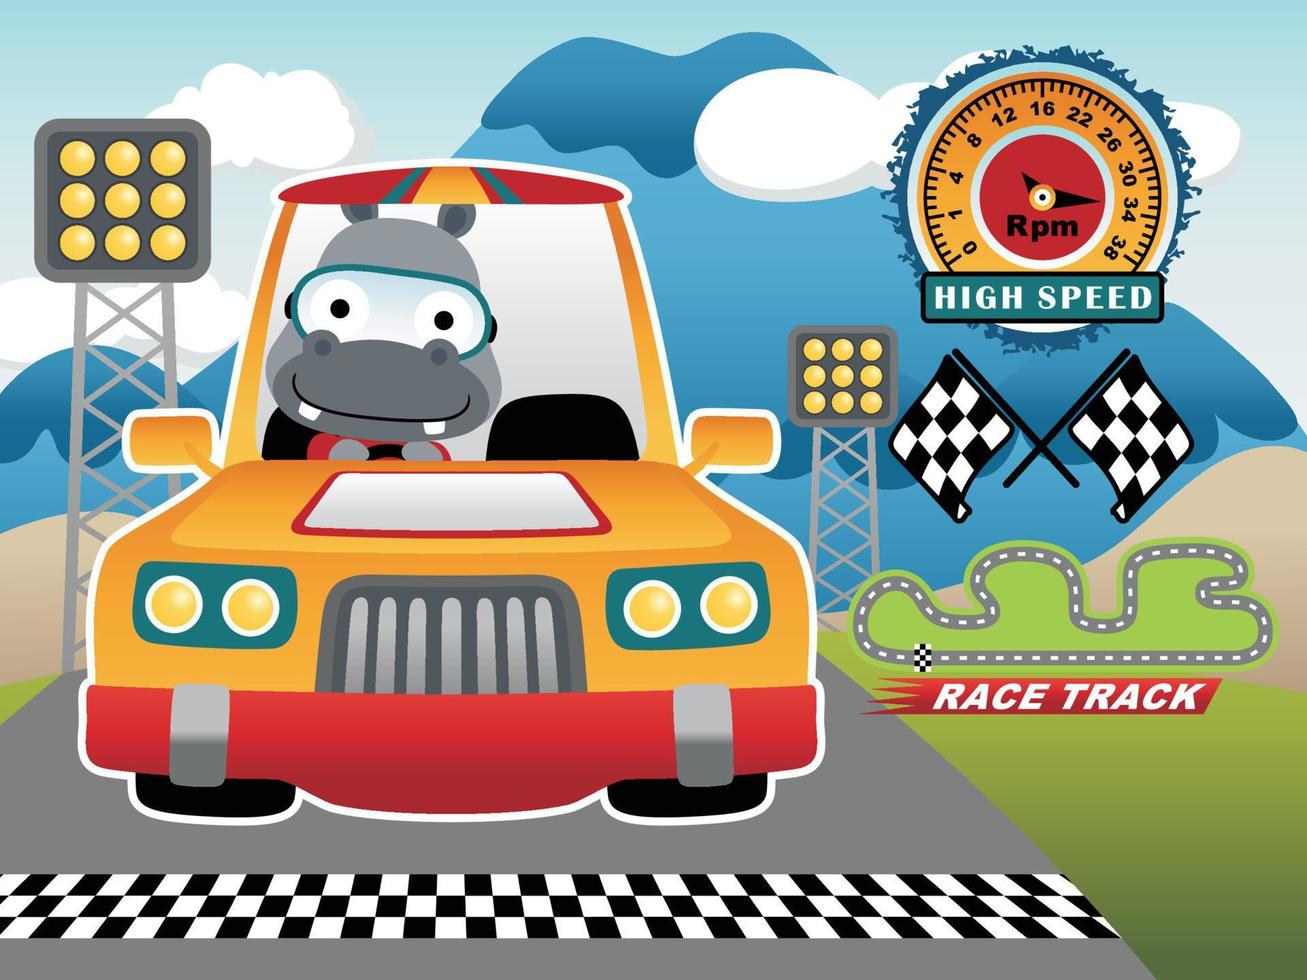 Funny hippo cartoon driving racing car on mountain background, car racing elements vector